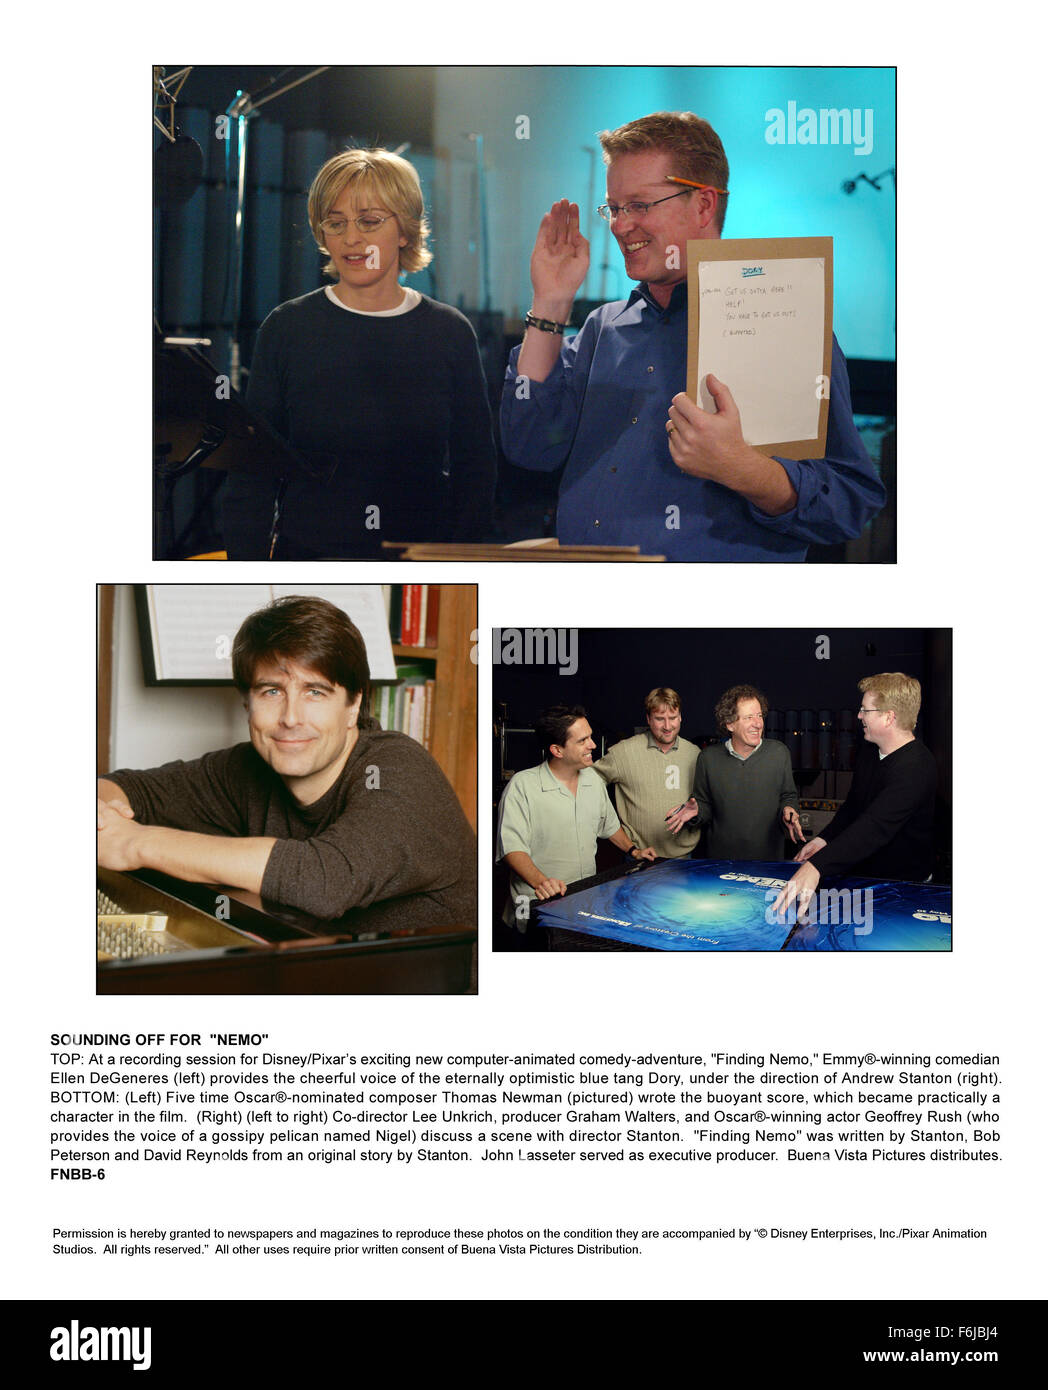 May 18, 2003; Hollywood, CA, USA; (top) ELLEN GEGENERES as the voice of Dory with Director ANDREW STANTON, (bottom left) Composer THOMAS NEWMAN, and (bottom right) Director LEE UNKRICH, Producer GRAHAM WALTERS, GEOFFREY RUSH as voice of Nigel, and Director ANDREW STANTON from the family animated adventure ''Finding Nemo'' directed by Andrew Stanton and Lee Unkrich. Stock Photo